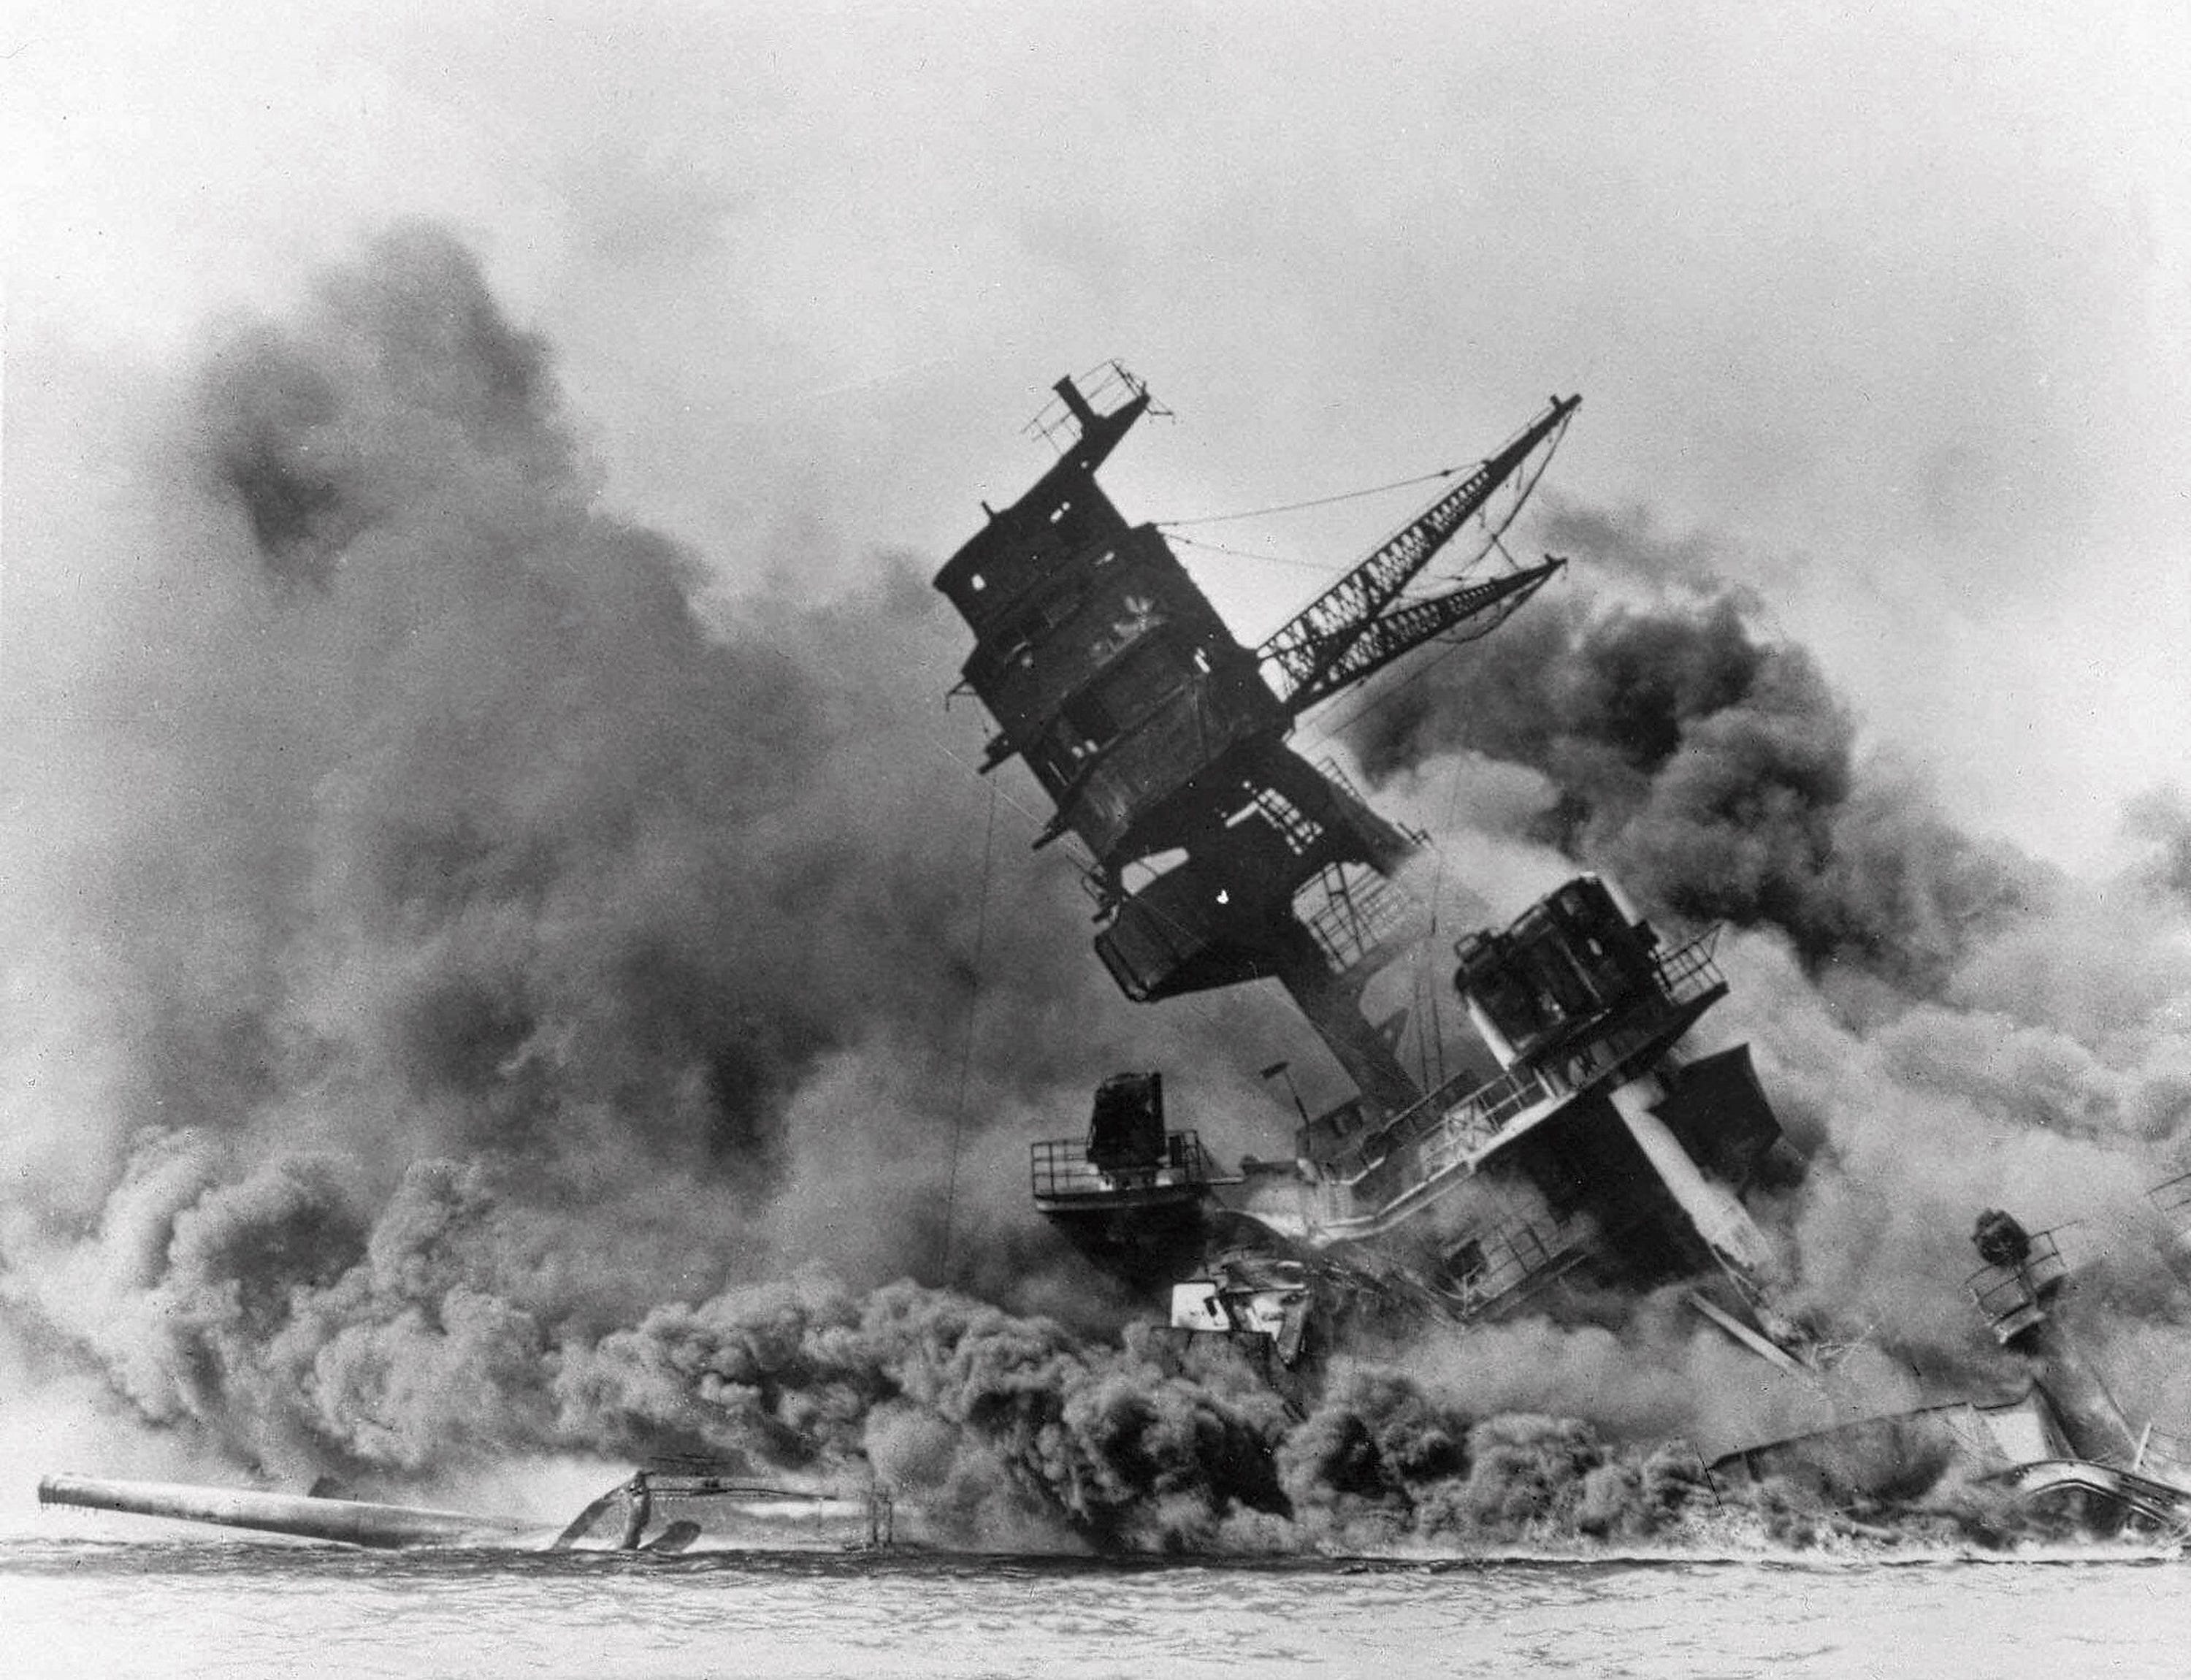 pearl harbor remembrance day: historical photos show the dec. 7, 1941 attack in hawaii